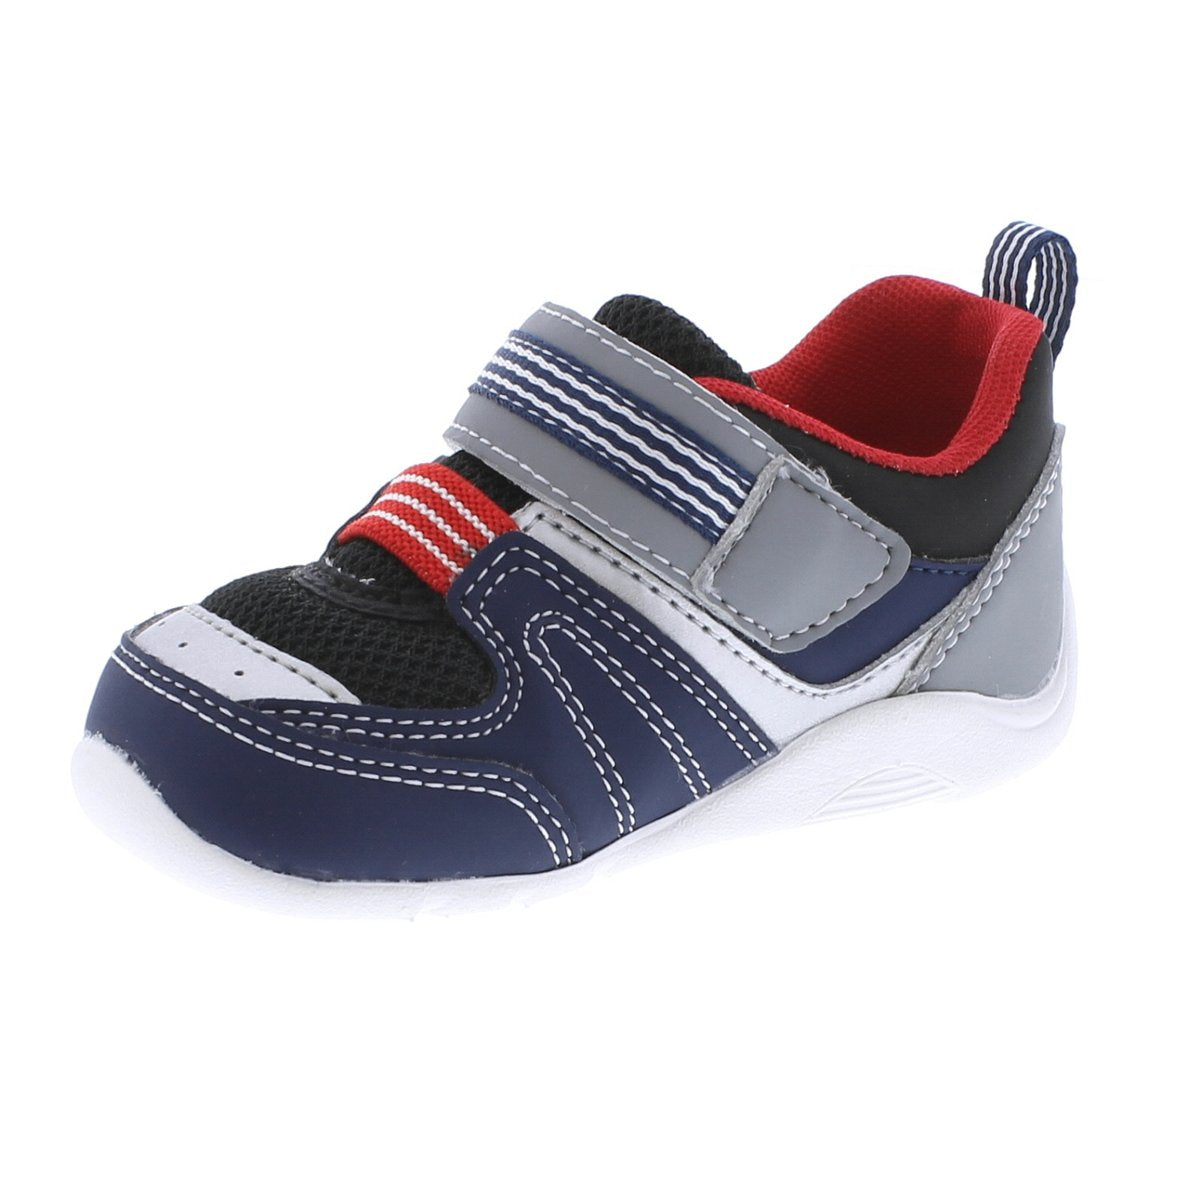 Baby Tsukihoshi Neko Sneaker in Navy/Red from the front view